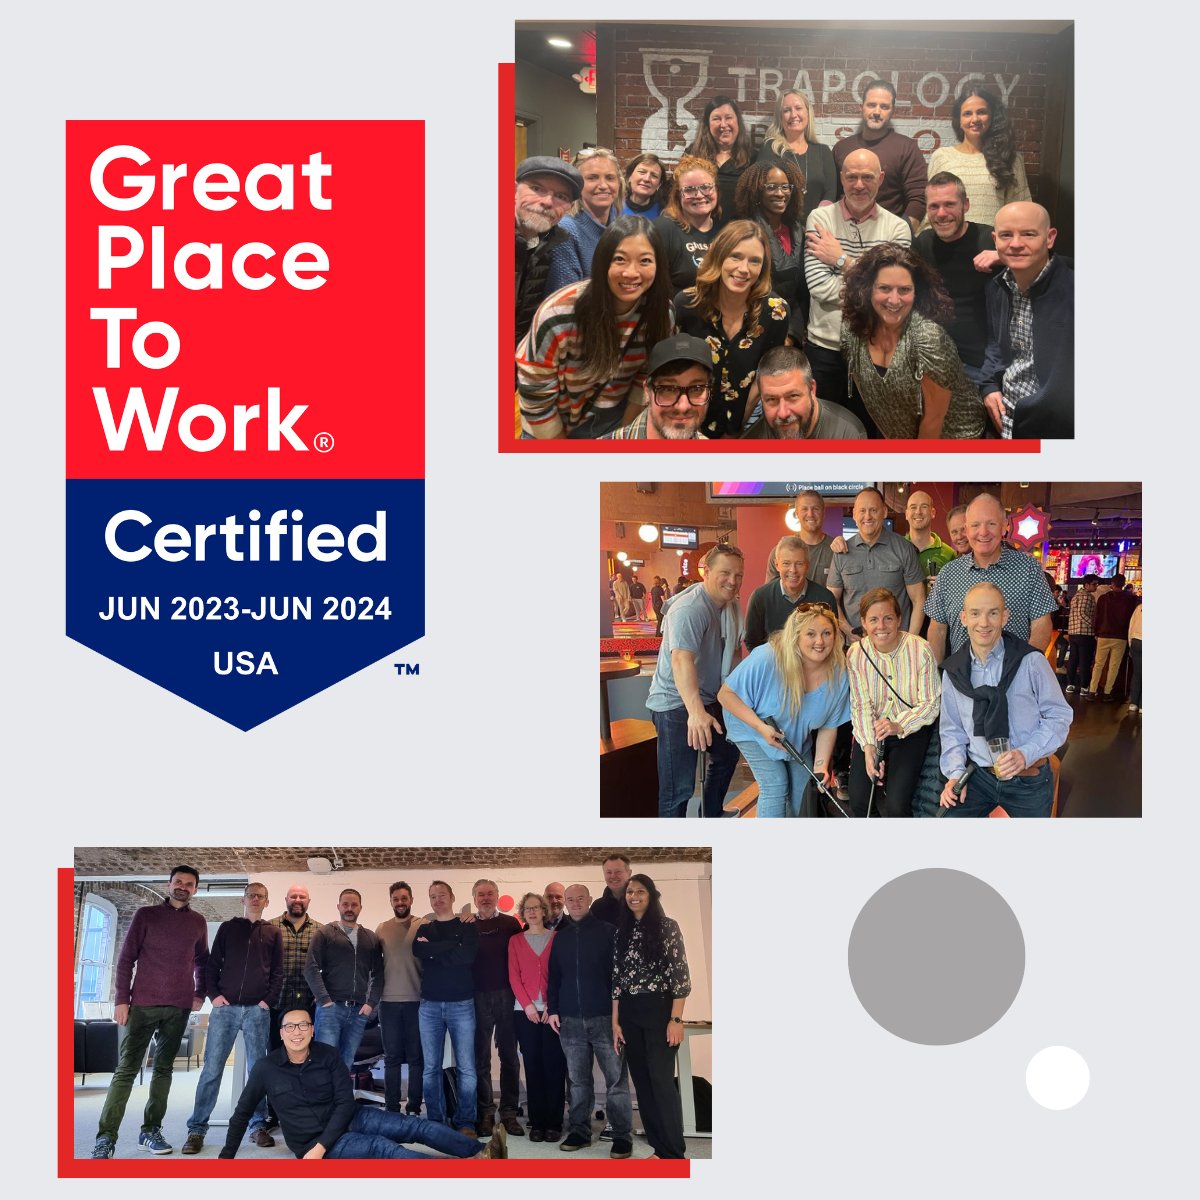 Proud of ETU's Great Place to Work certification for this year! #GPTWcertified Check out our great culture 👉 hubs.ly/Q01VLJLk0